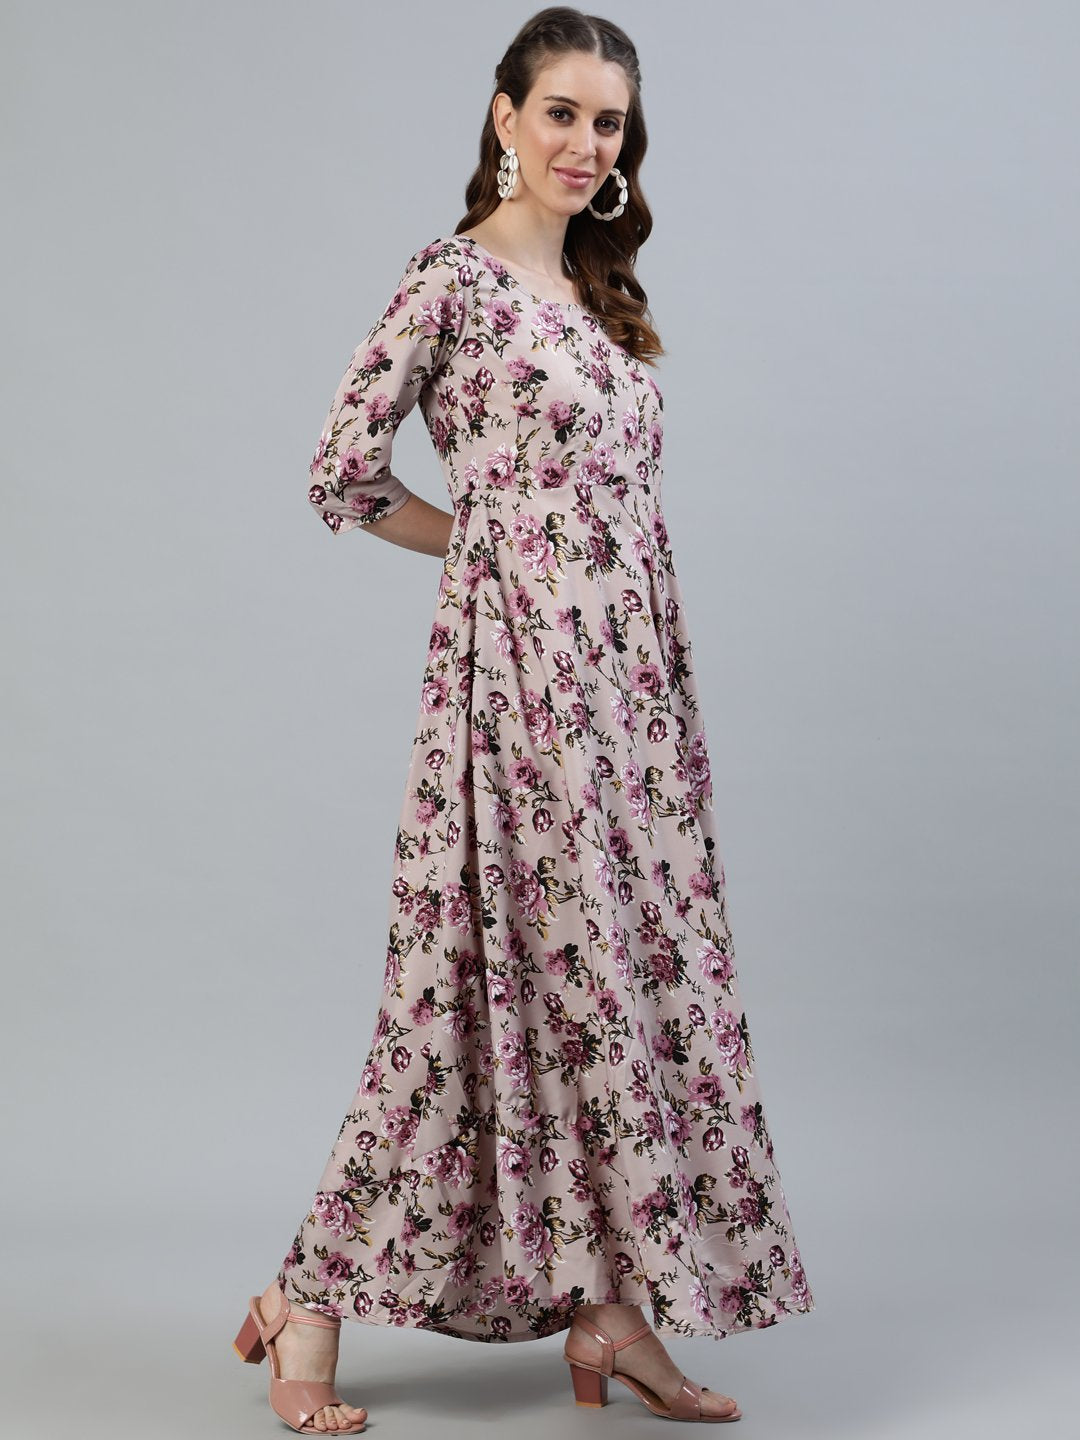 Women's Purple Floral Printed Maxi Dress With Three Quarter Sleeves - Nayo Clothing